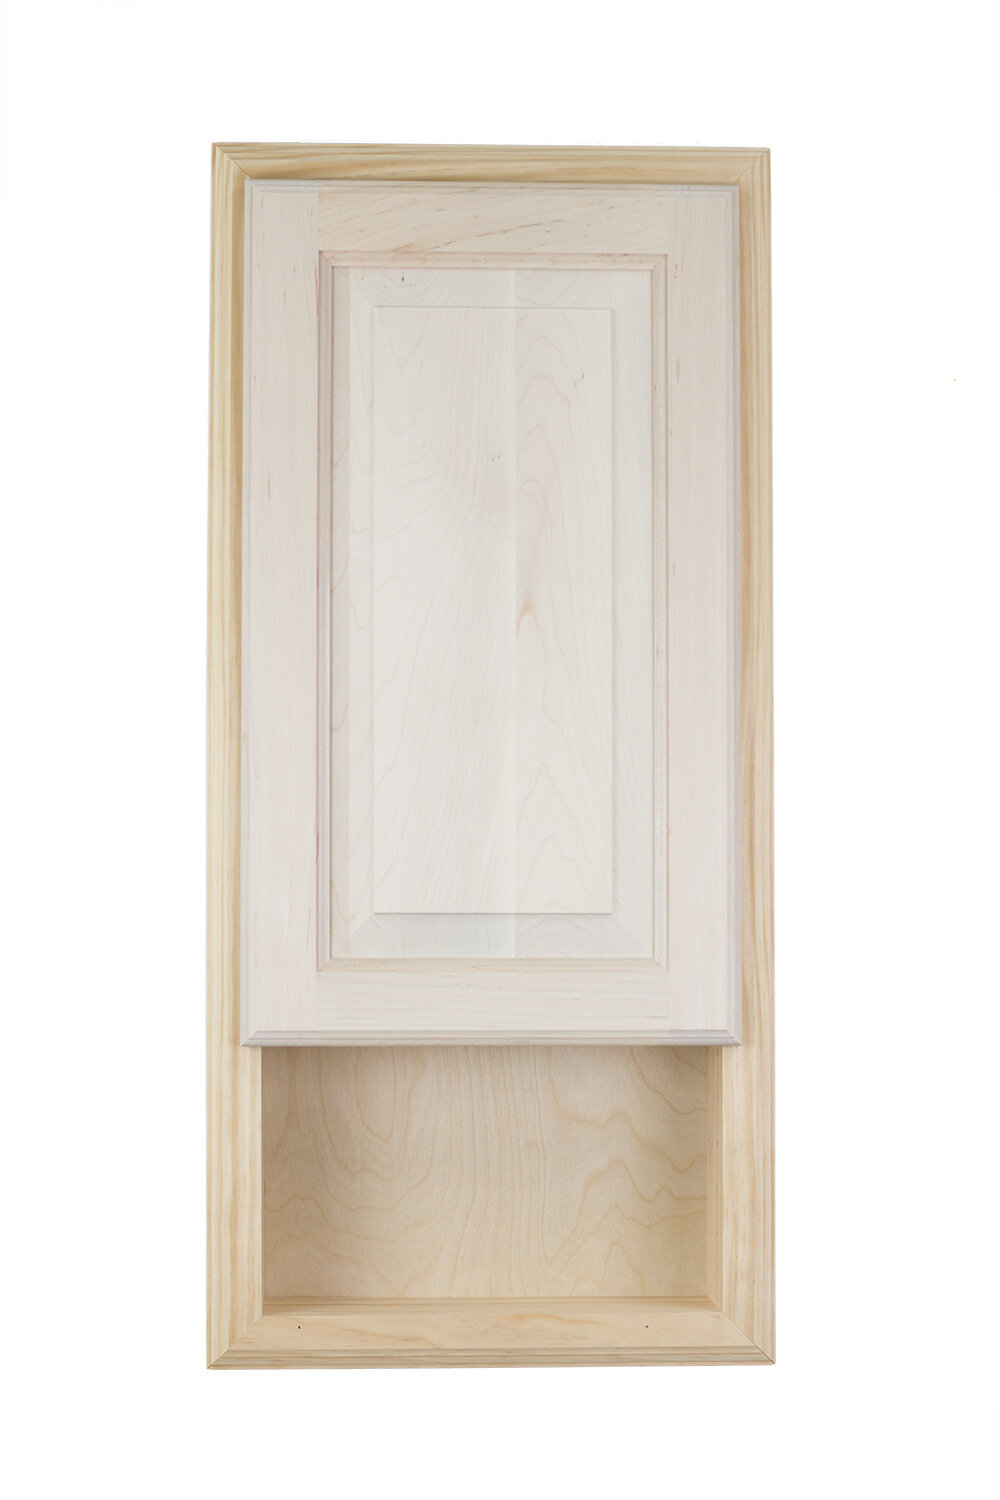 Wg Wood Products Belton Recessed Framed Medicine Cabinet With 3